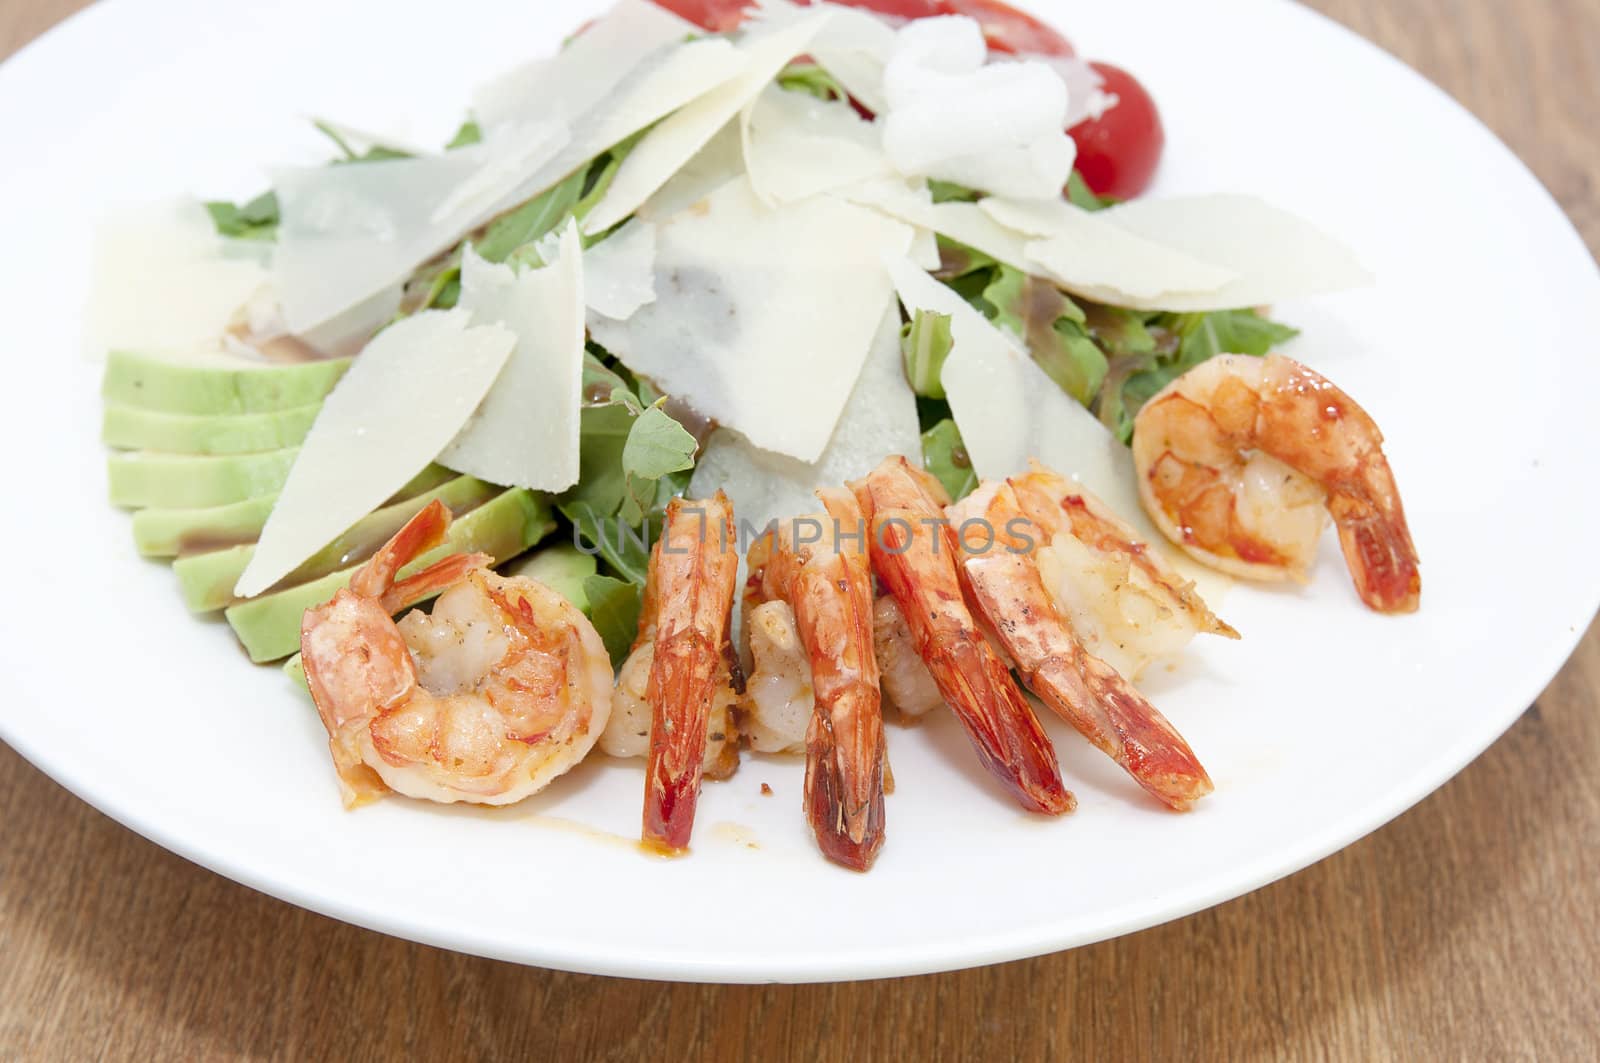 arugula dish with shrimp by Lester120